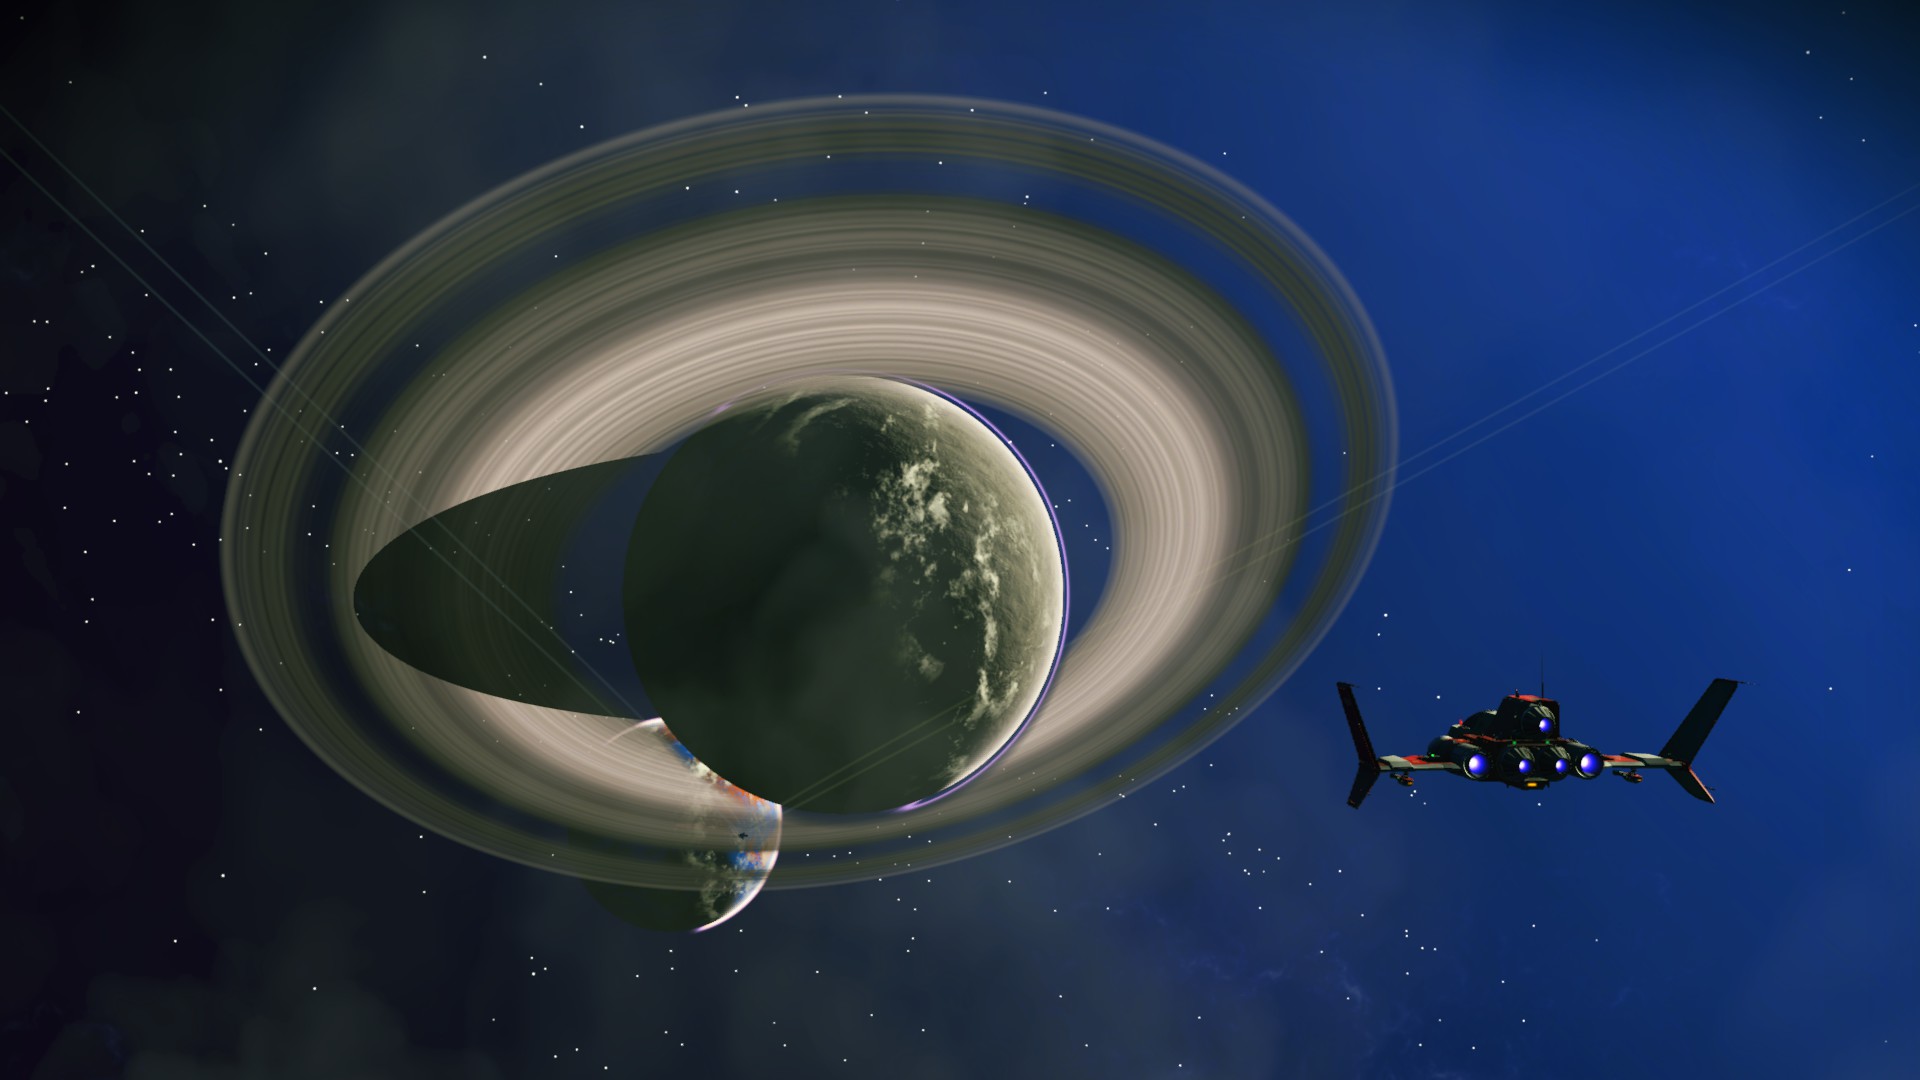 No Man’s Sky - fighter approaching a ringed planet